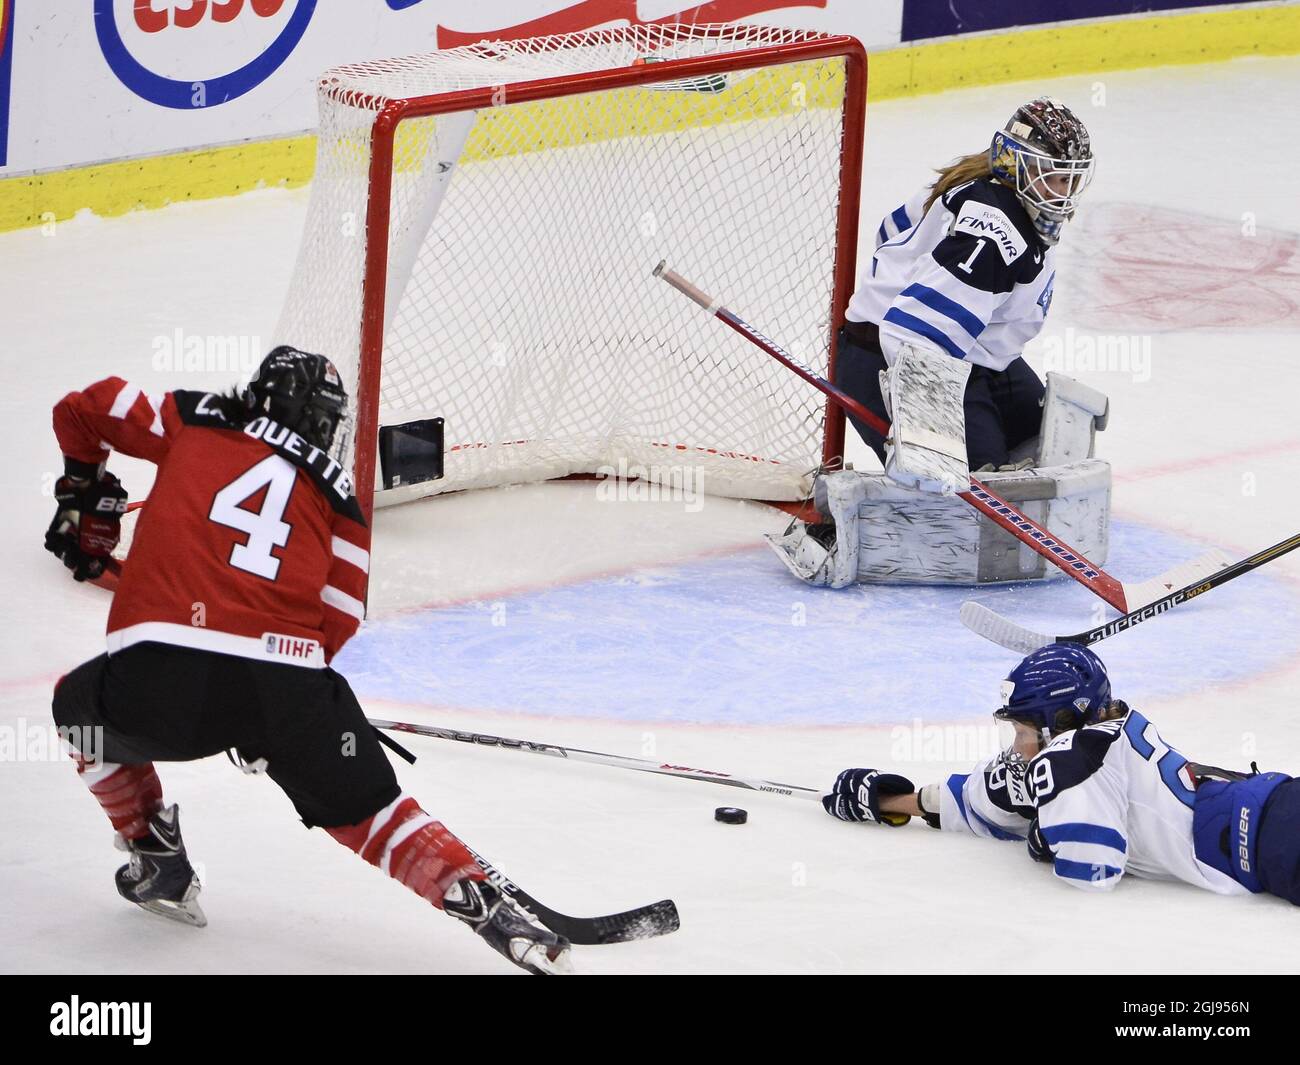 CORRECTION SPELLING AV SCORERS NAME Canadian Brigette Lacquette (4) scores the opening goal, past Finlands goalkeeper Eveliina Suonpaa (1) and Karoliina Rantamaki (29) during the 2015 IIHF Ice Hockey Women's World Championship group A match between Canada and Finland at Malmo Isstadion in Malmo, southern Sweden, on March 31, 2015. Photo: Claudio Bresciani / TT / code 10090 Stock Photo